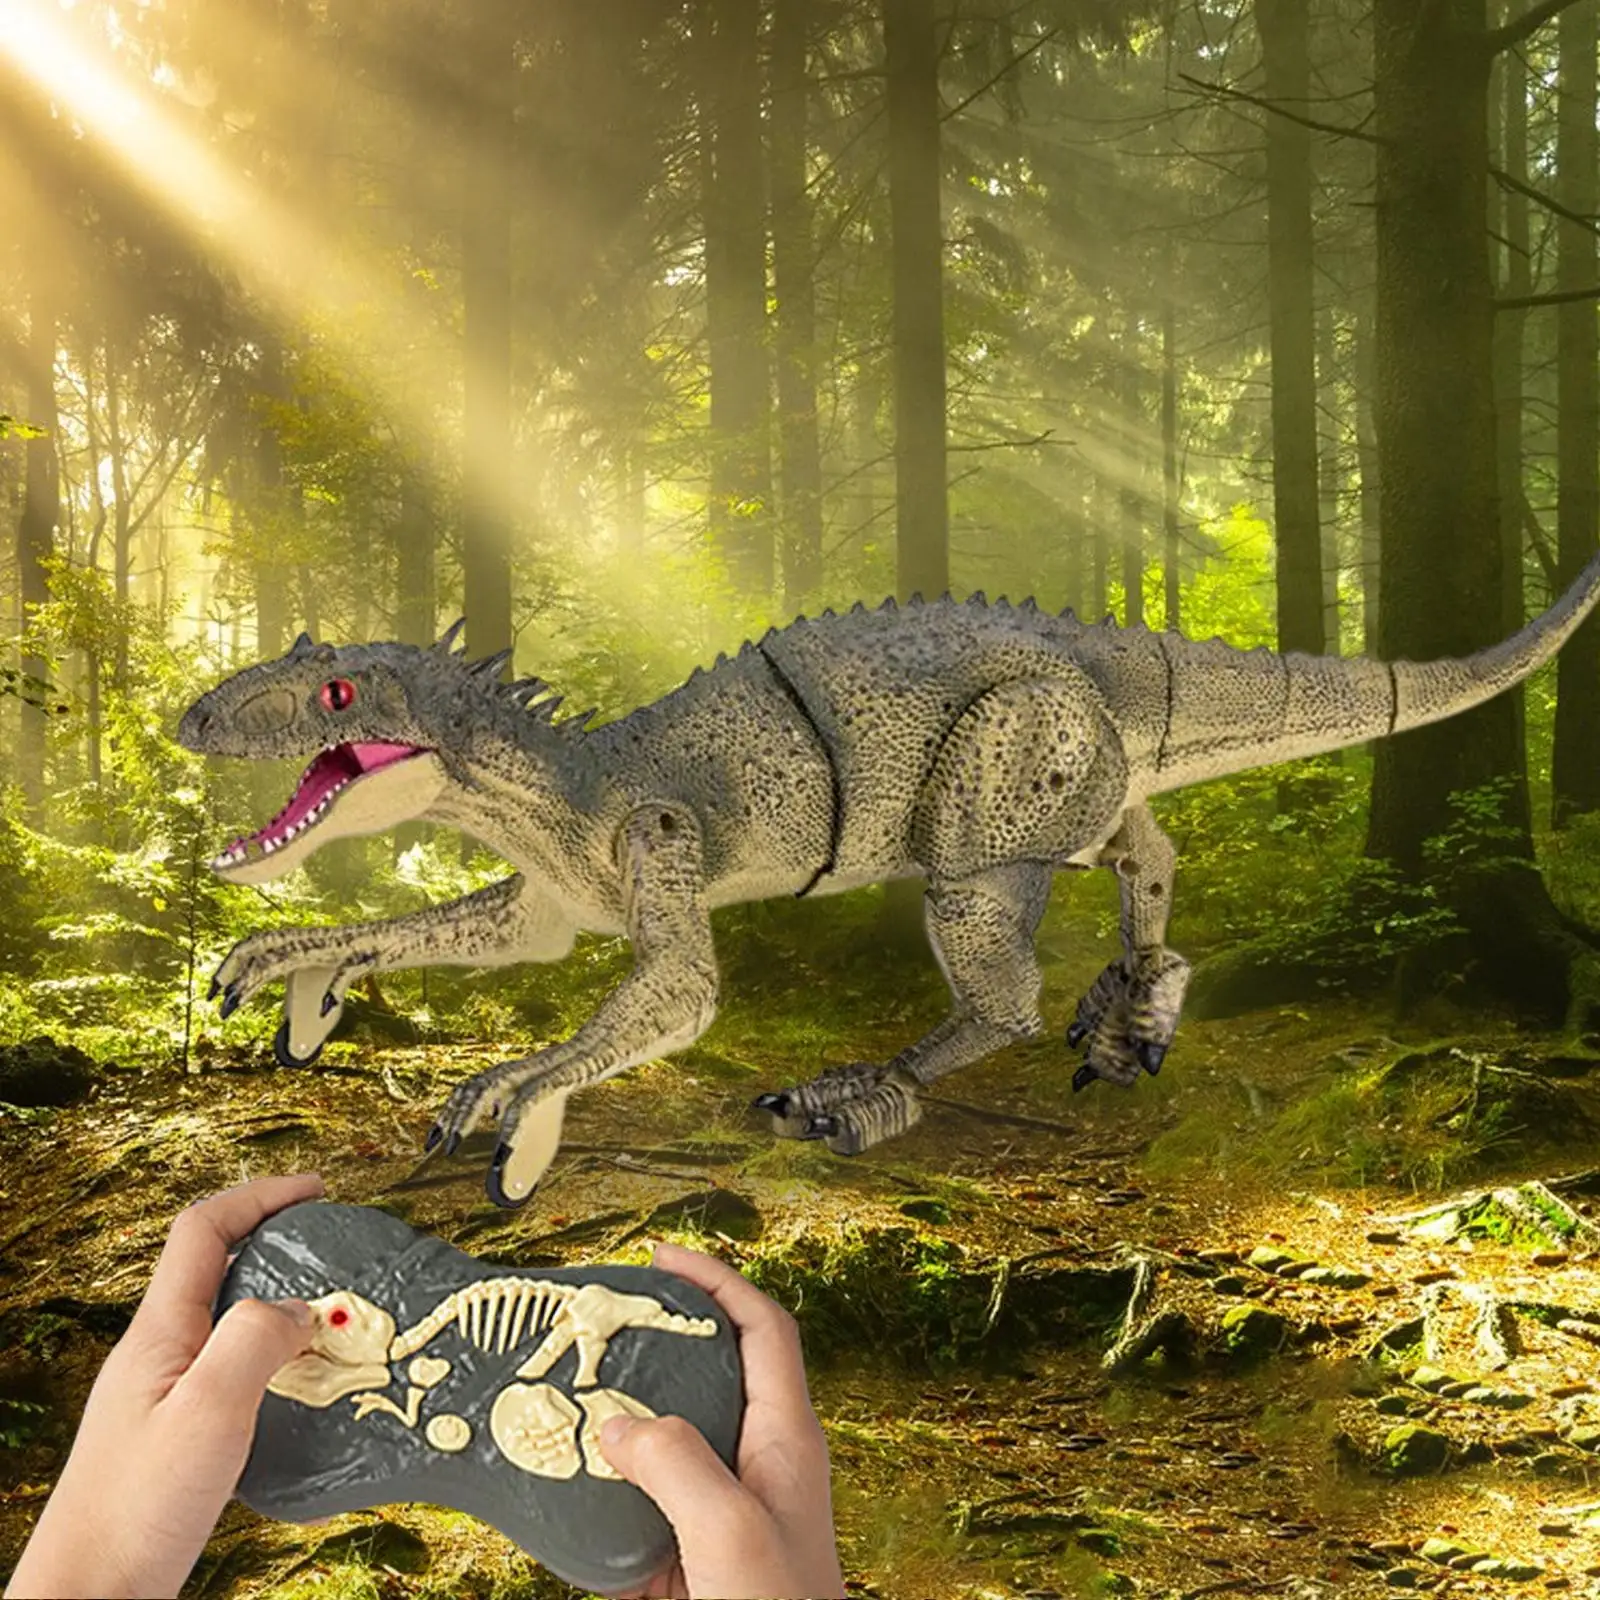 Remote Control Dinosaur Toy Walking Dinosaur with Sound Realistic for Gift